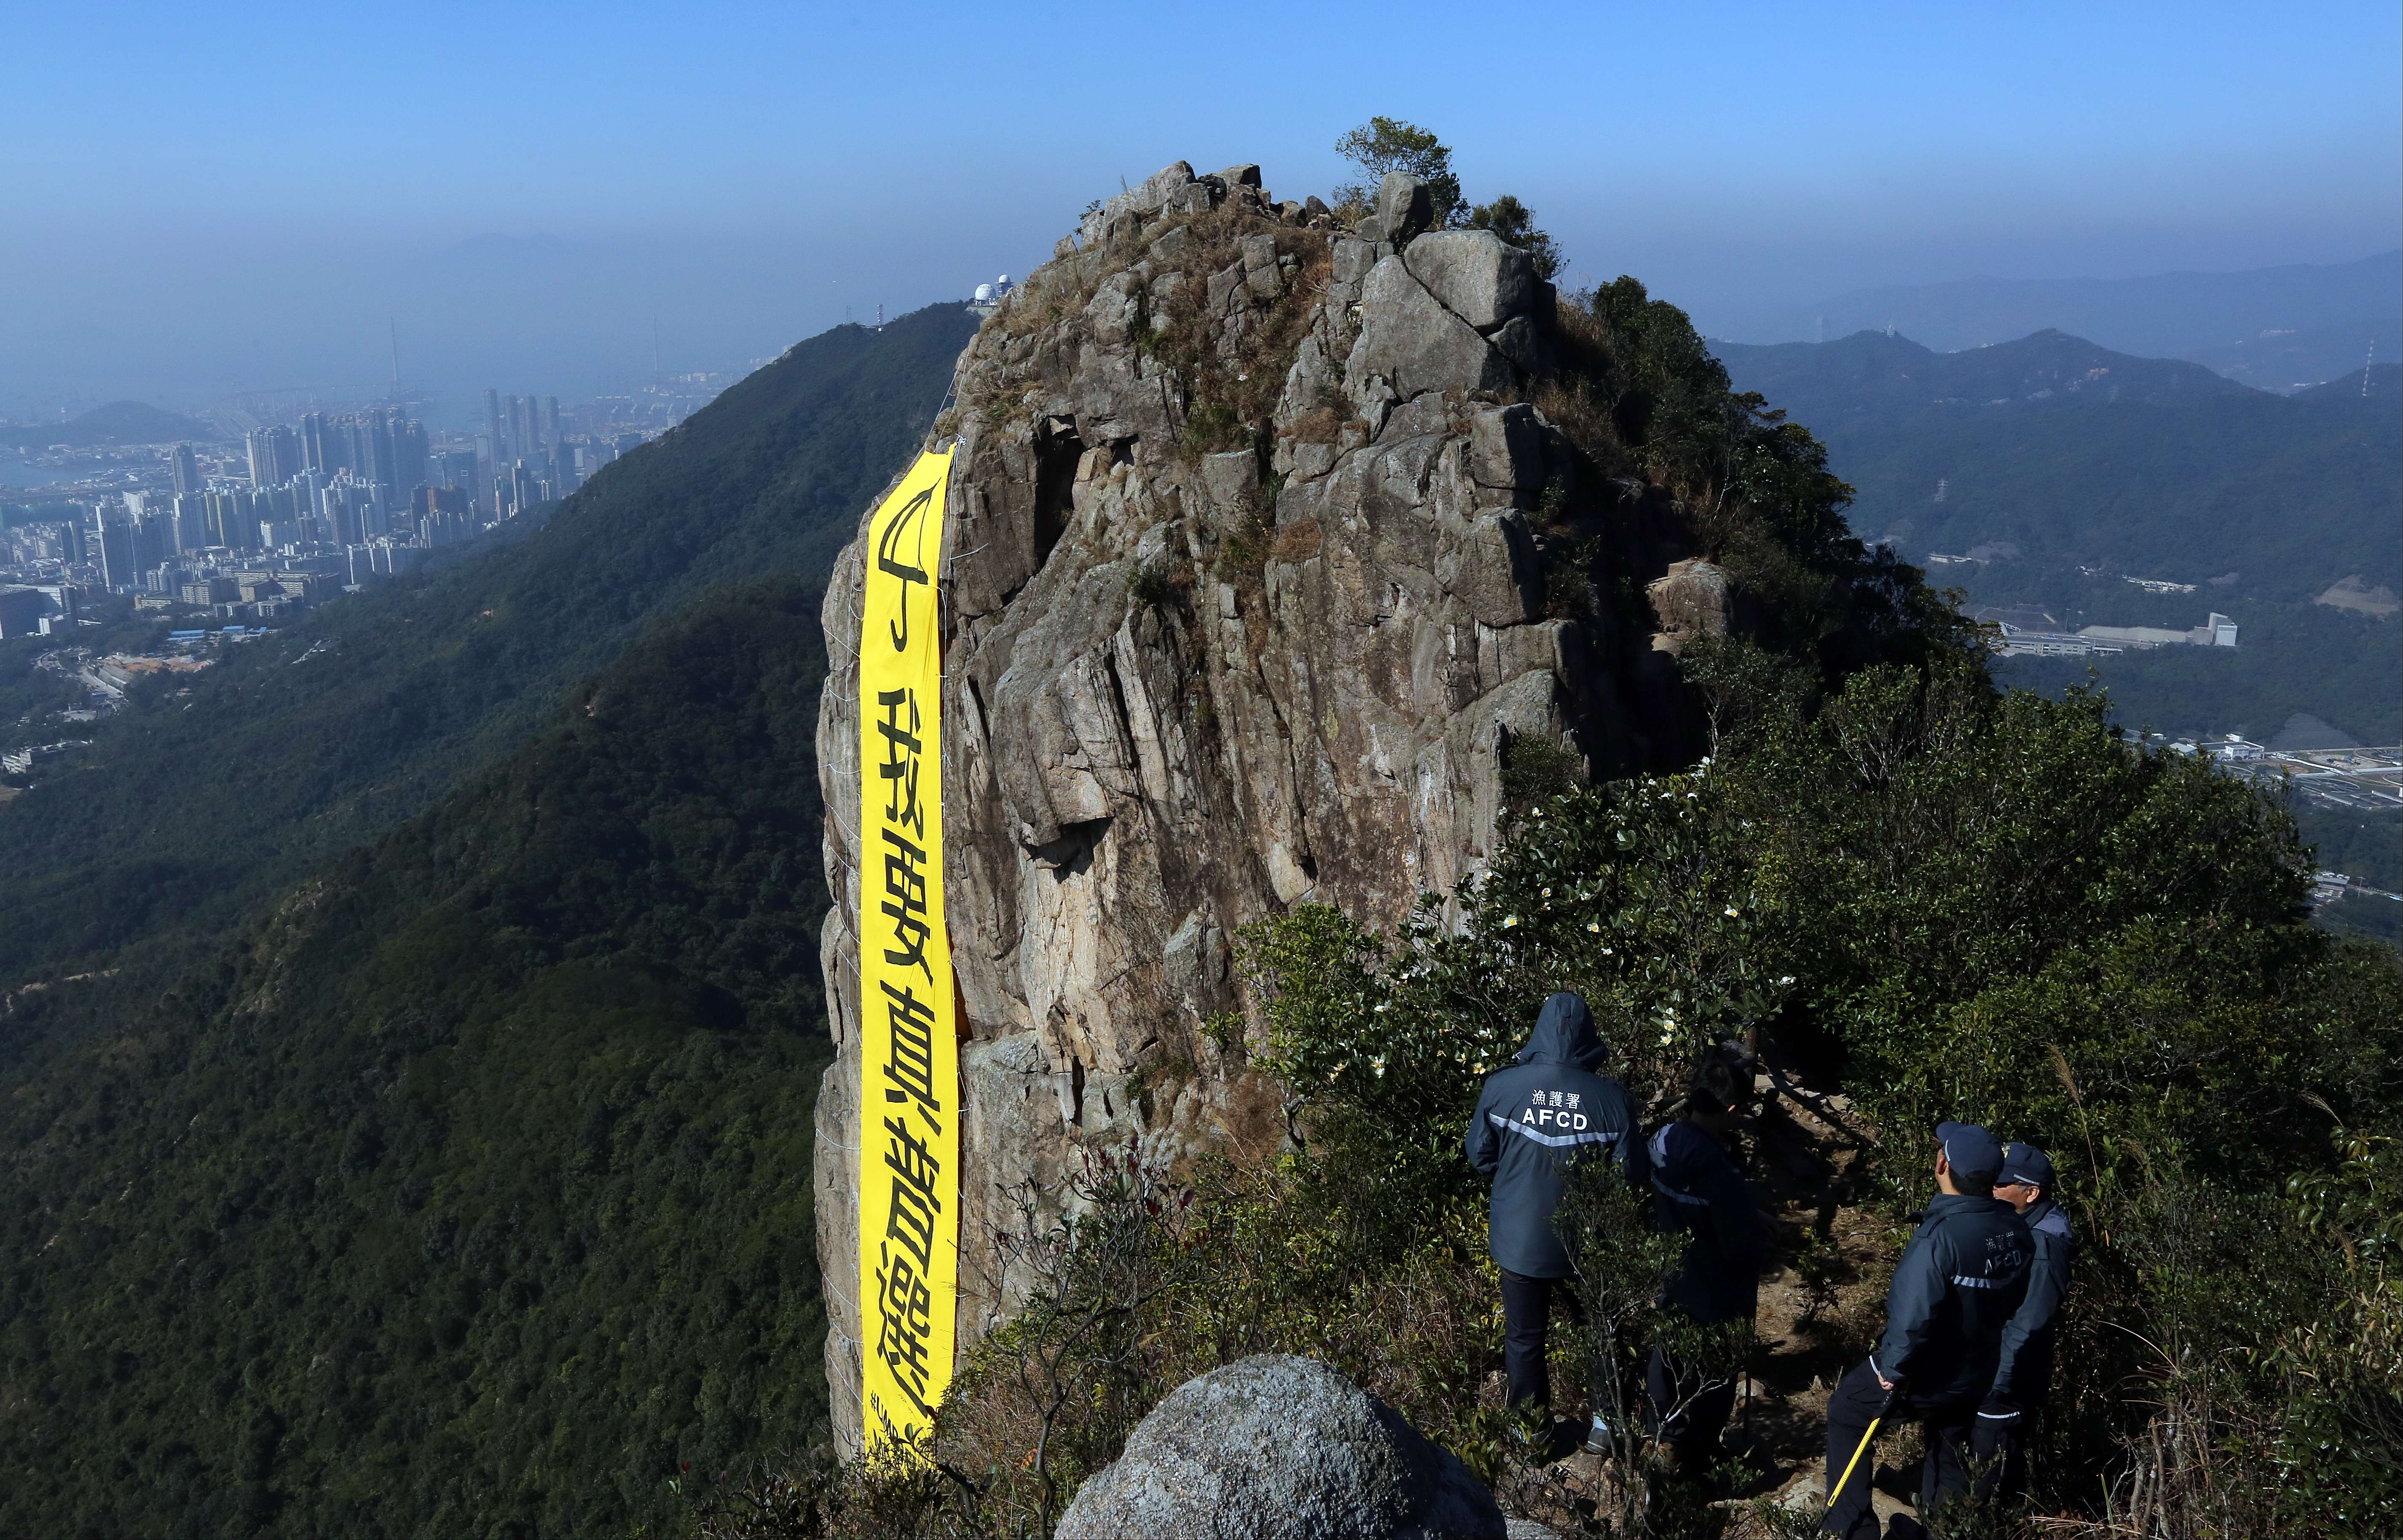 A pro-democracy banner saying “I want genuine universal suffrage” hangs on the Lion Rock, two weeks after the Occupy Central protests ended in December 2014. Photo: Felix Wong